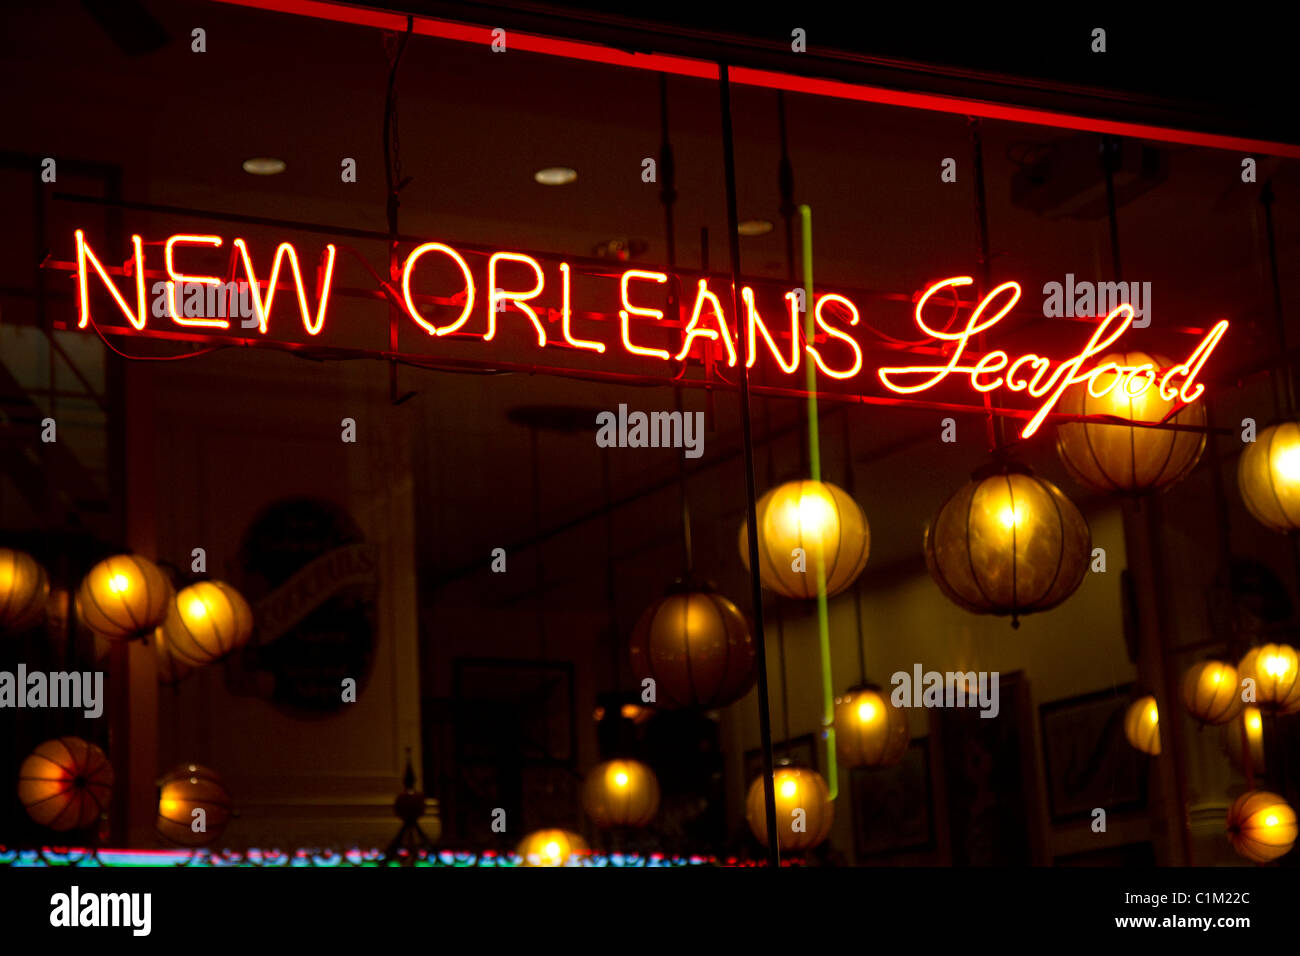 Neon sign advertising New Orleans seafood in the French Quarter of New Orleans, Louisiana, USA. Stock Photo